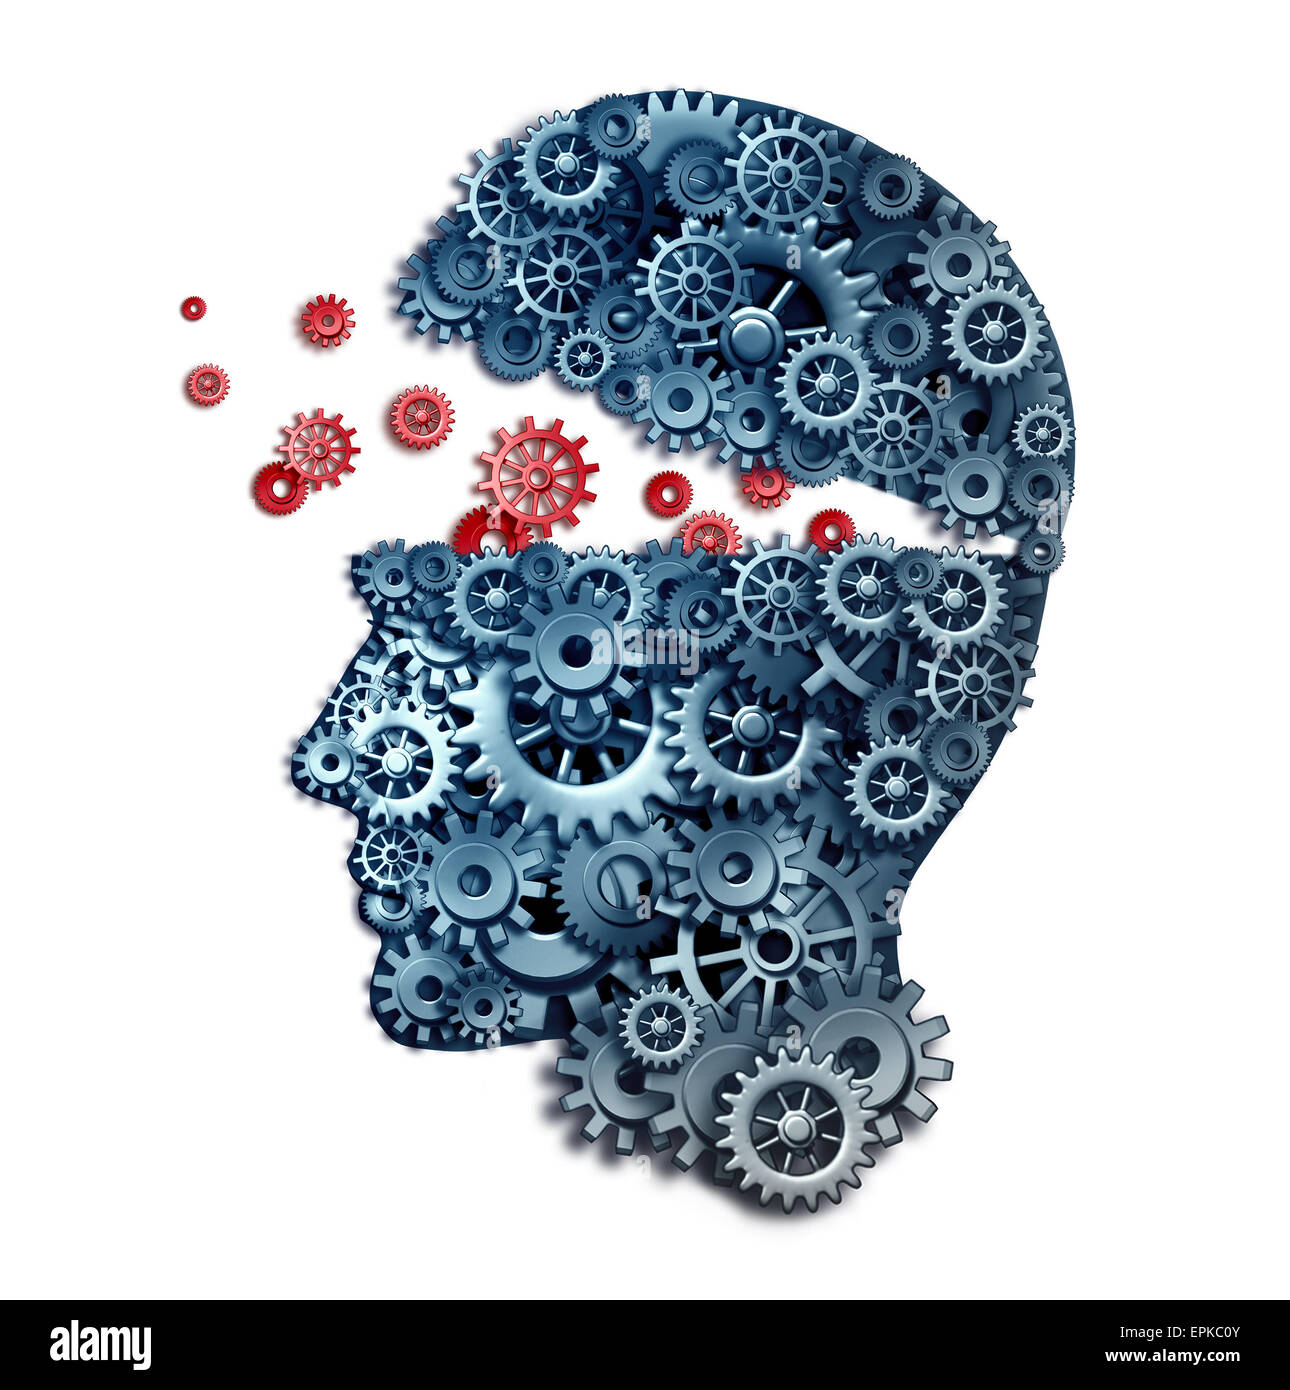 Business teacher and mentorship concept as a learn and lead symbol for career skill building from a corporate trainer as a human head made of gears and cogs on a white background. Stock Photo